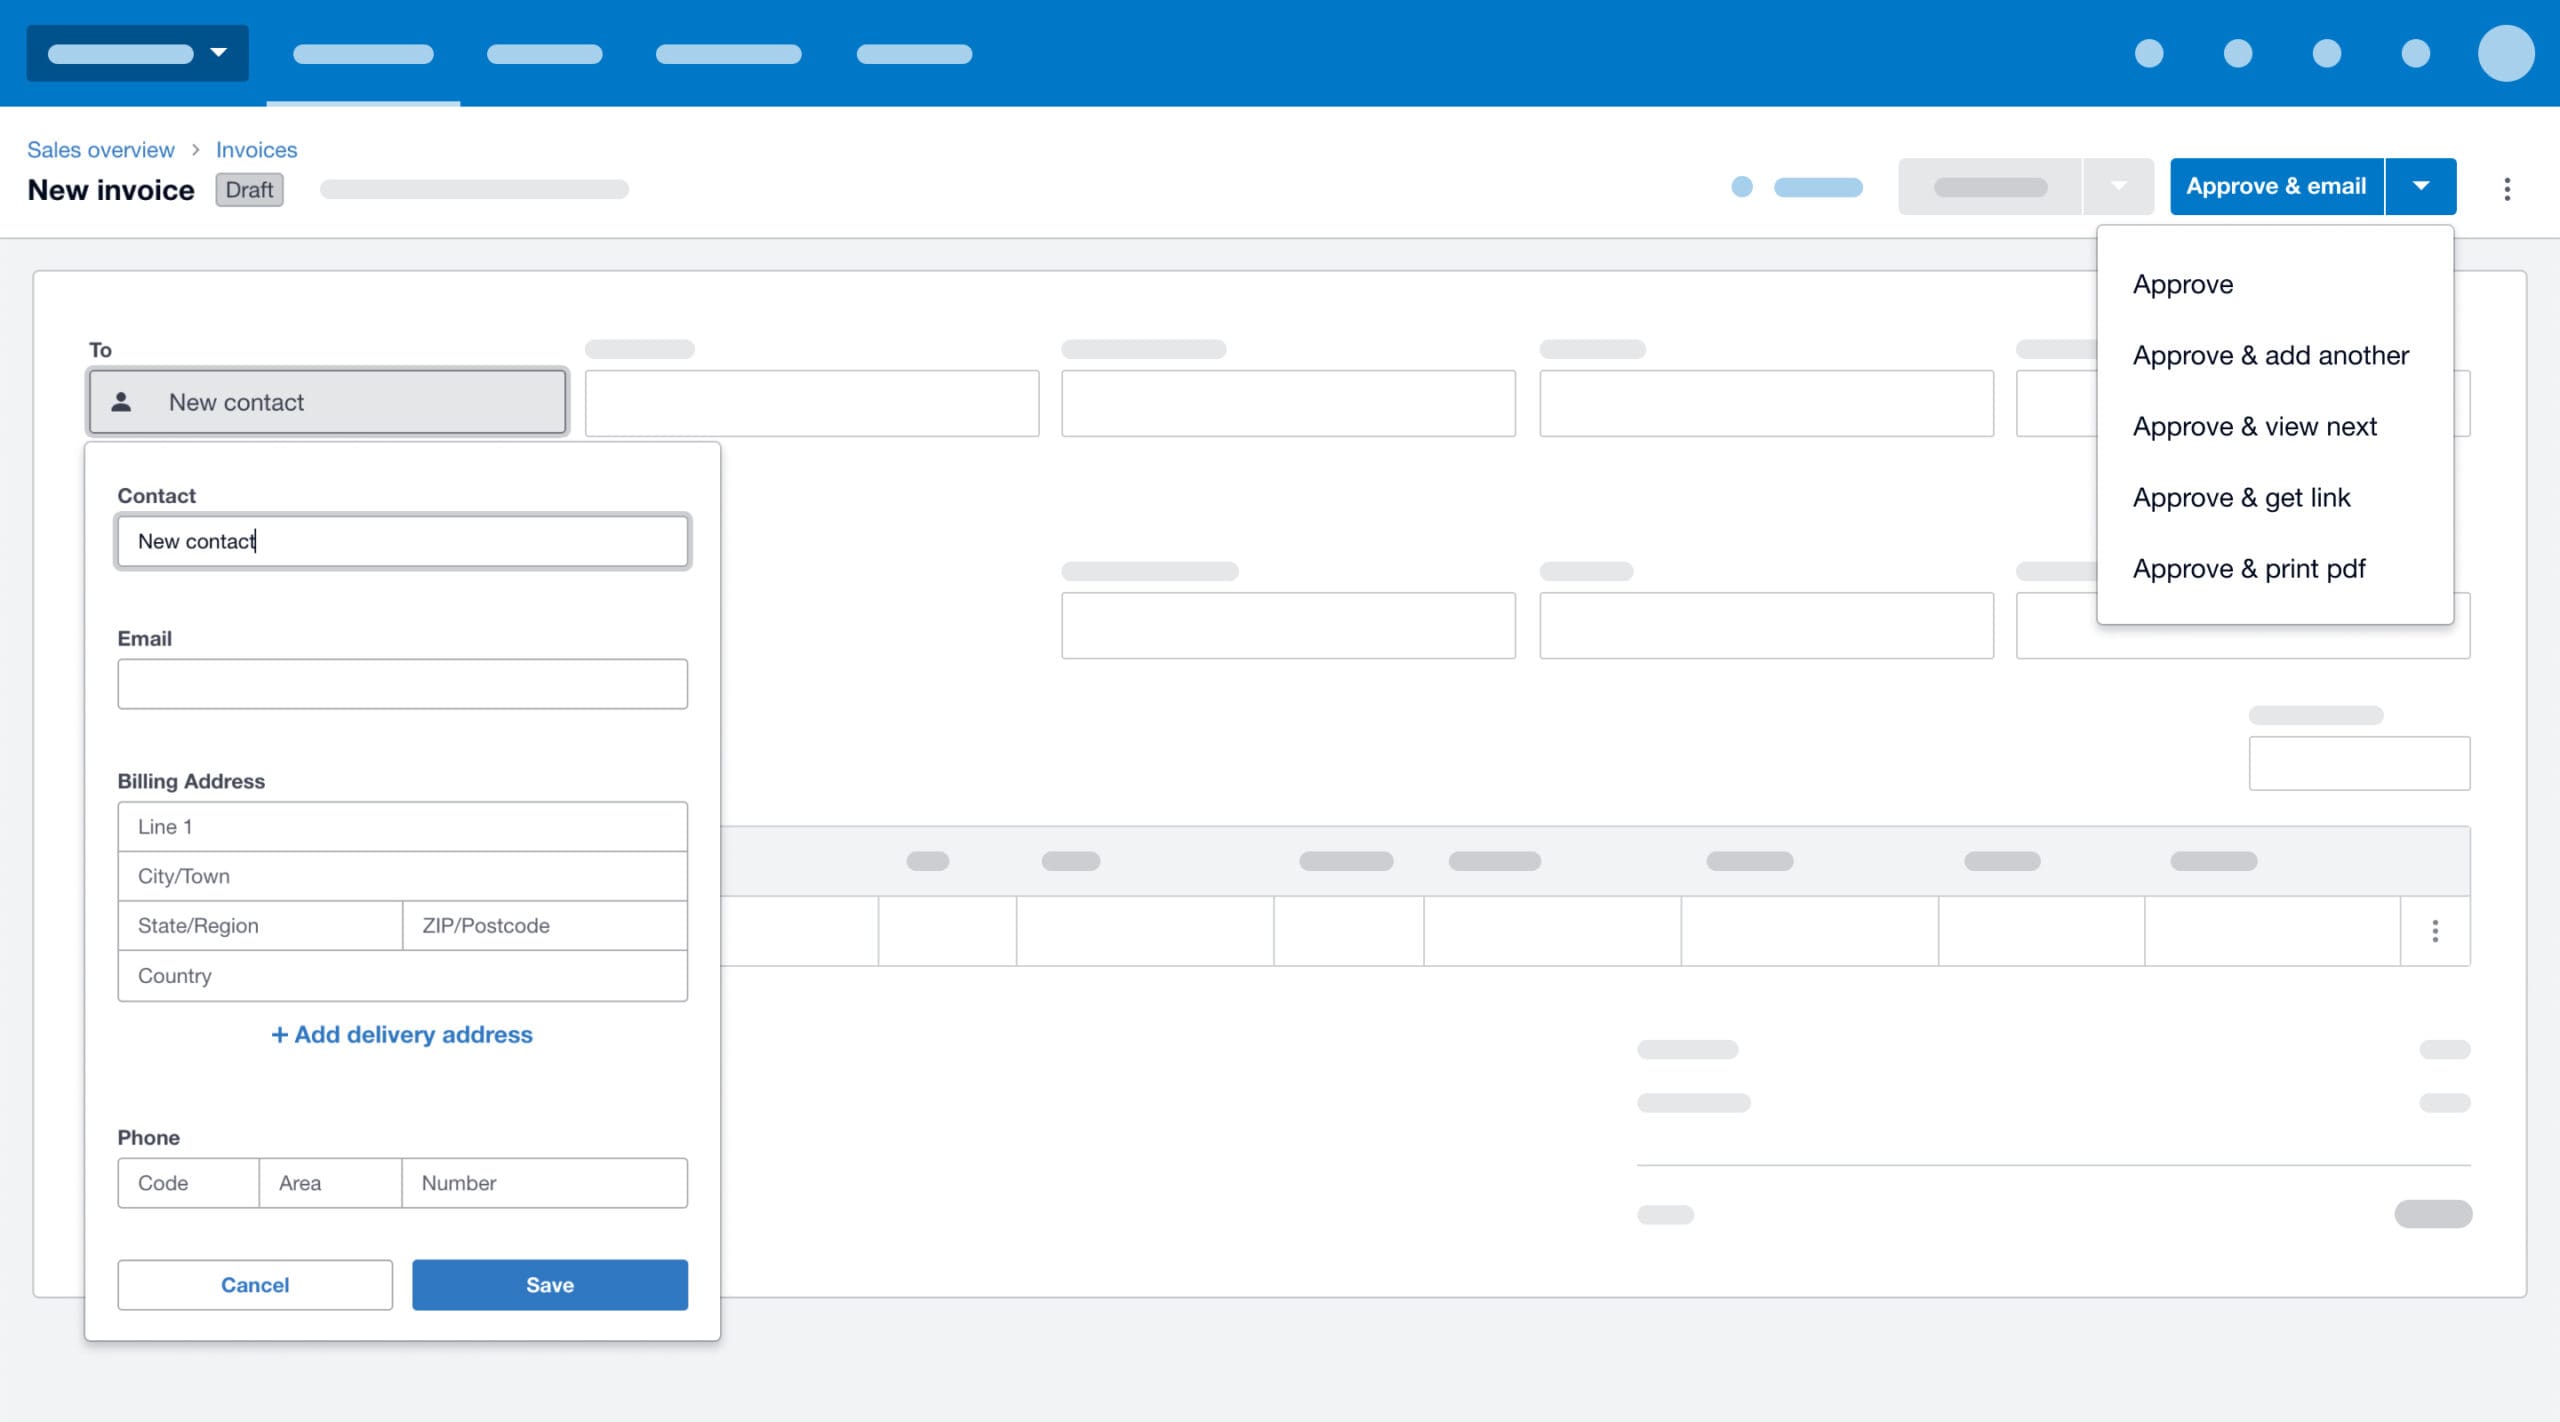 Product screenshot showing the contact pop-up and 'Approve &' functionality in new invoicing.